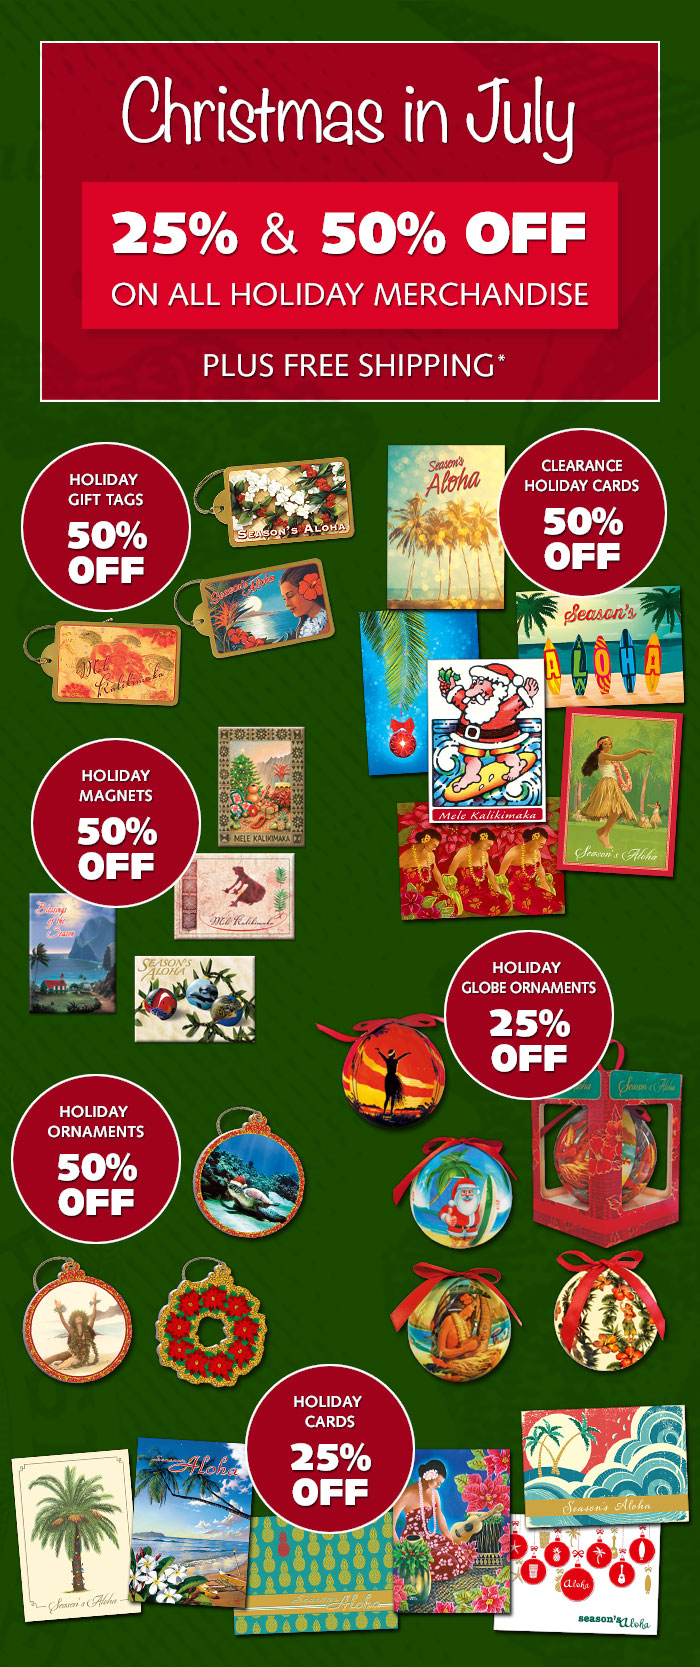 Christmas in July - Up to 50% OFF all Holiday Merchandise